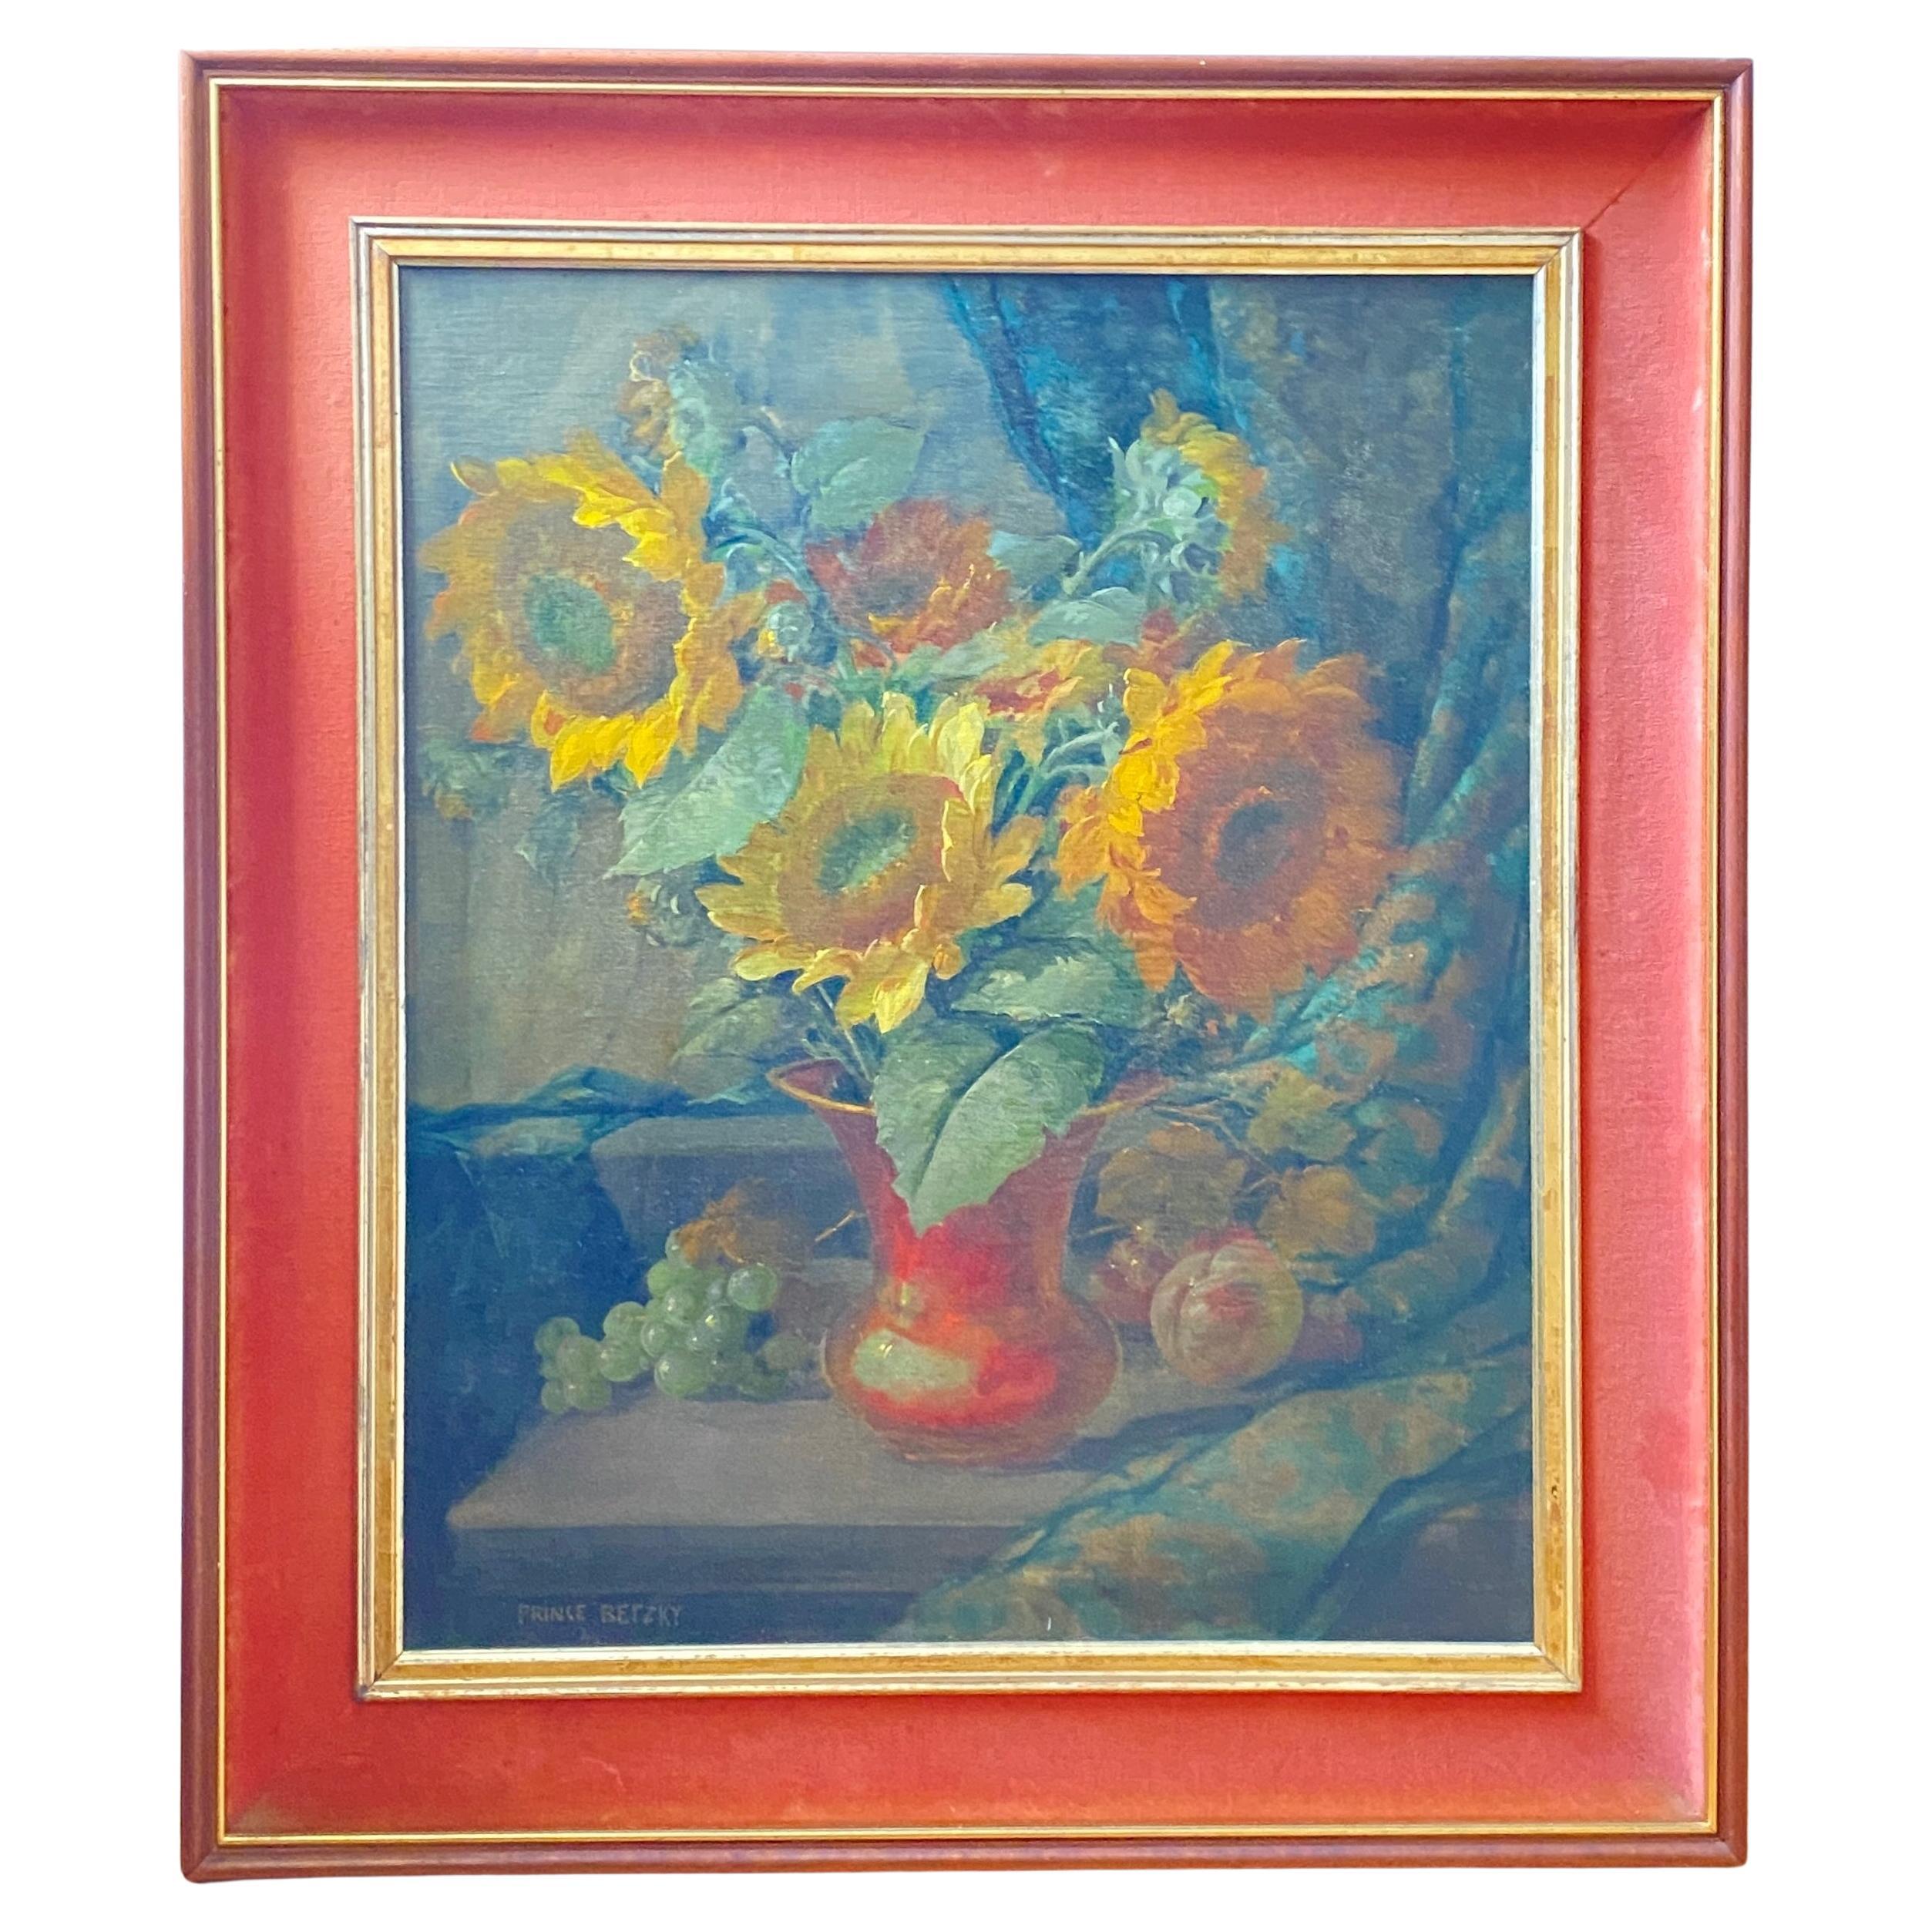 Mid Century Floral Still Life of Sunflowers signed Prince Betzky 1946